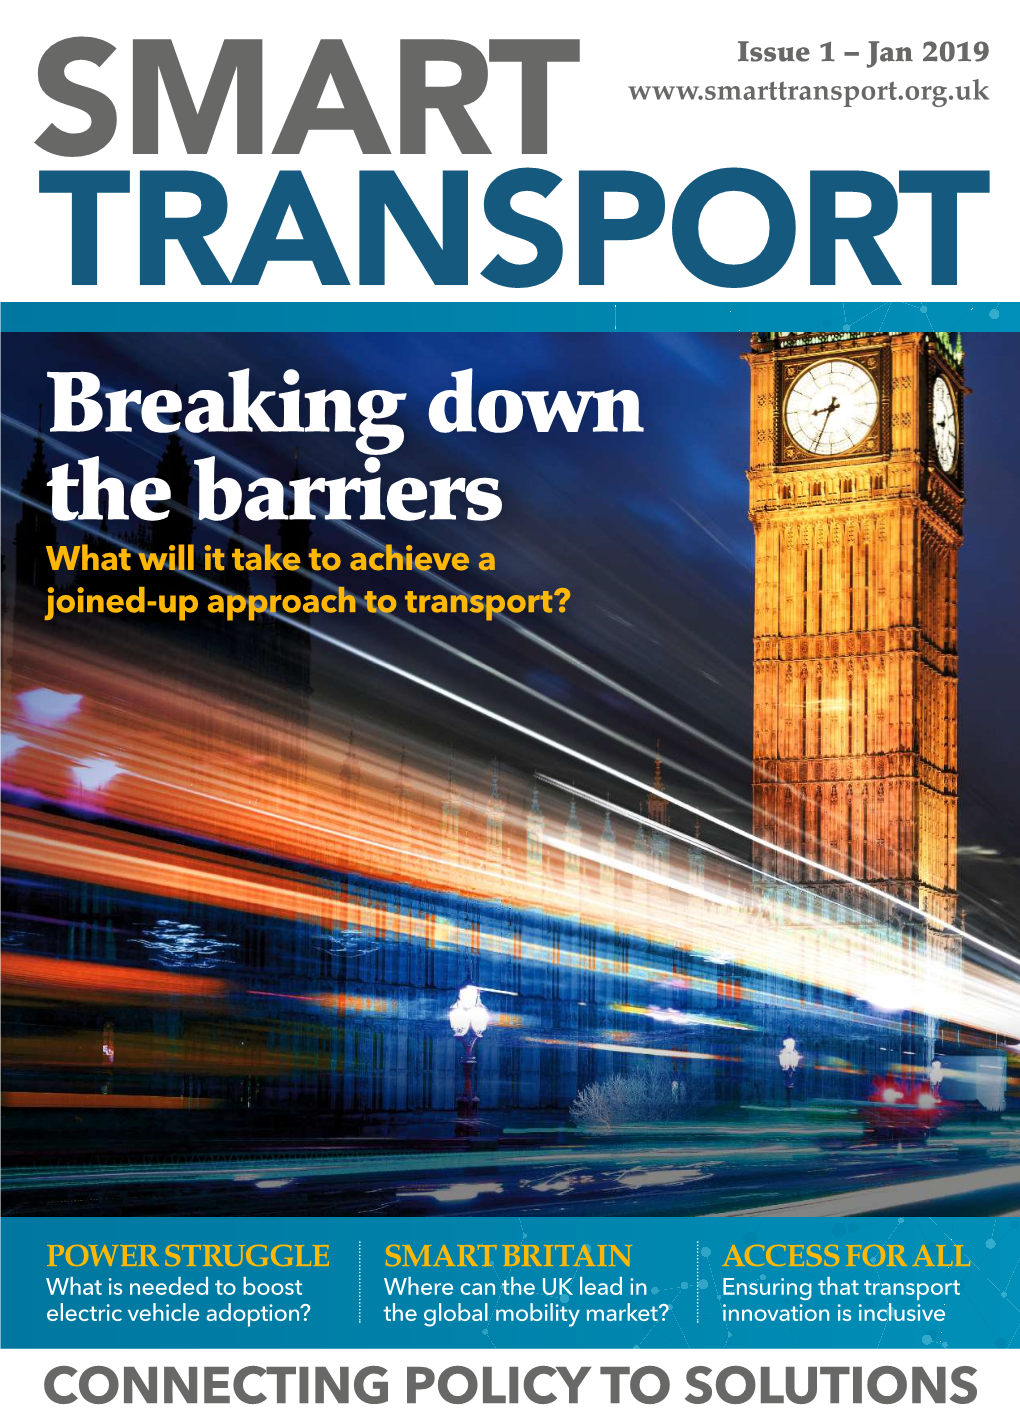 Smart Transport Membership Policy, Networking, Collaboration and Knowledge Transfer